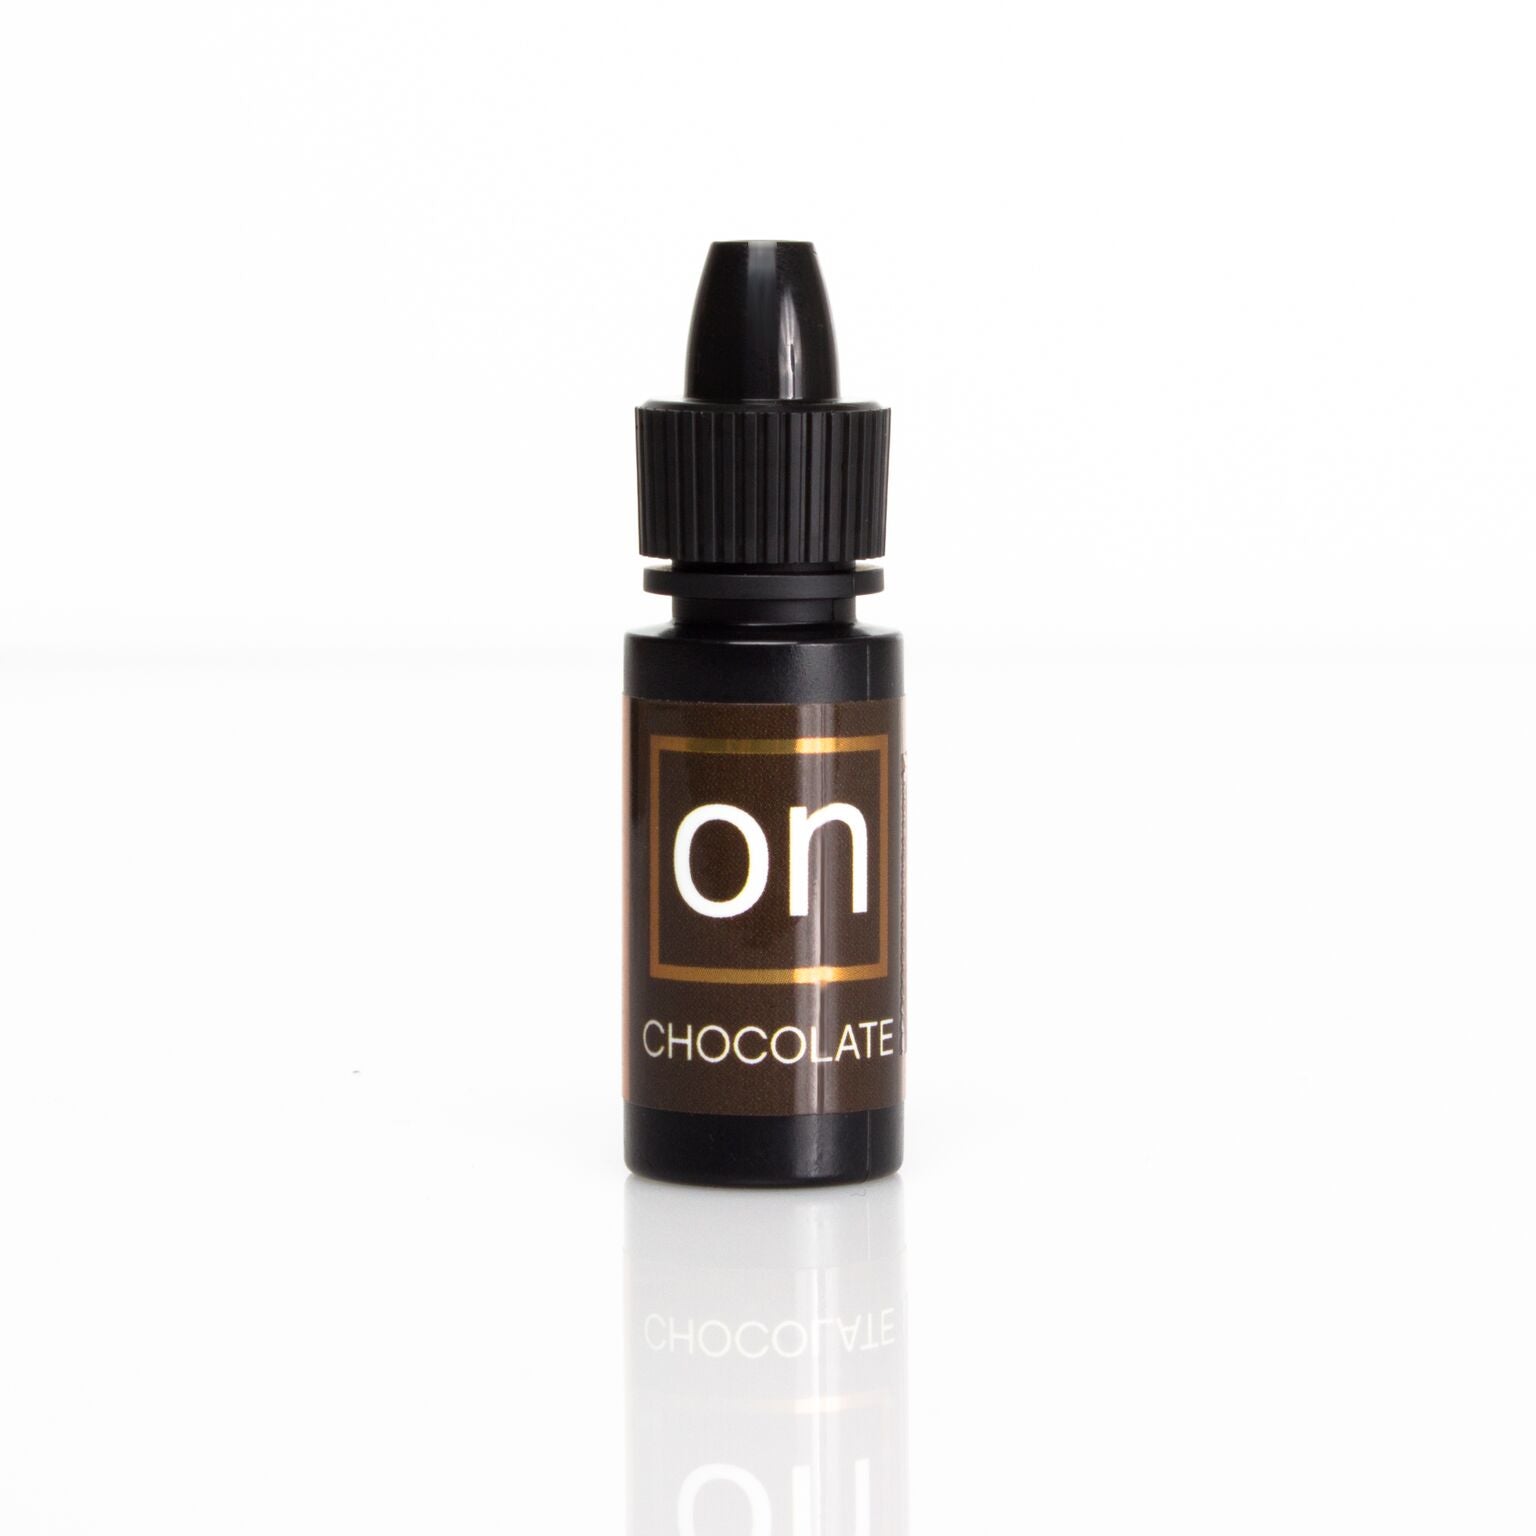 On for her, chocolate arousal oil - 5ml - Passionfruit